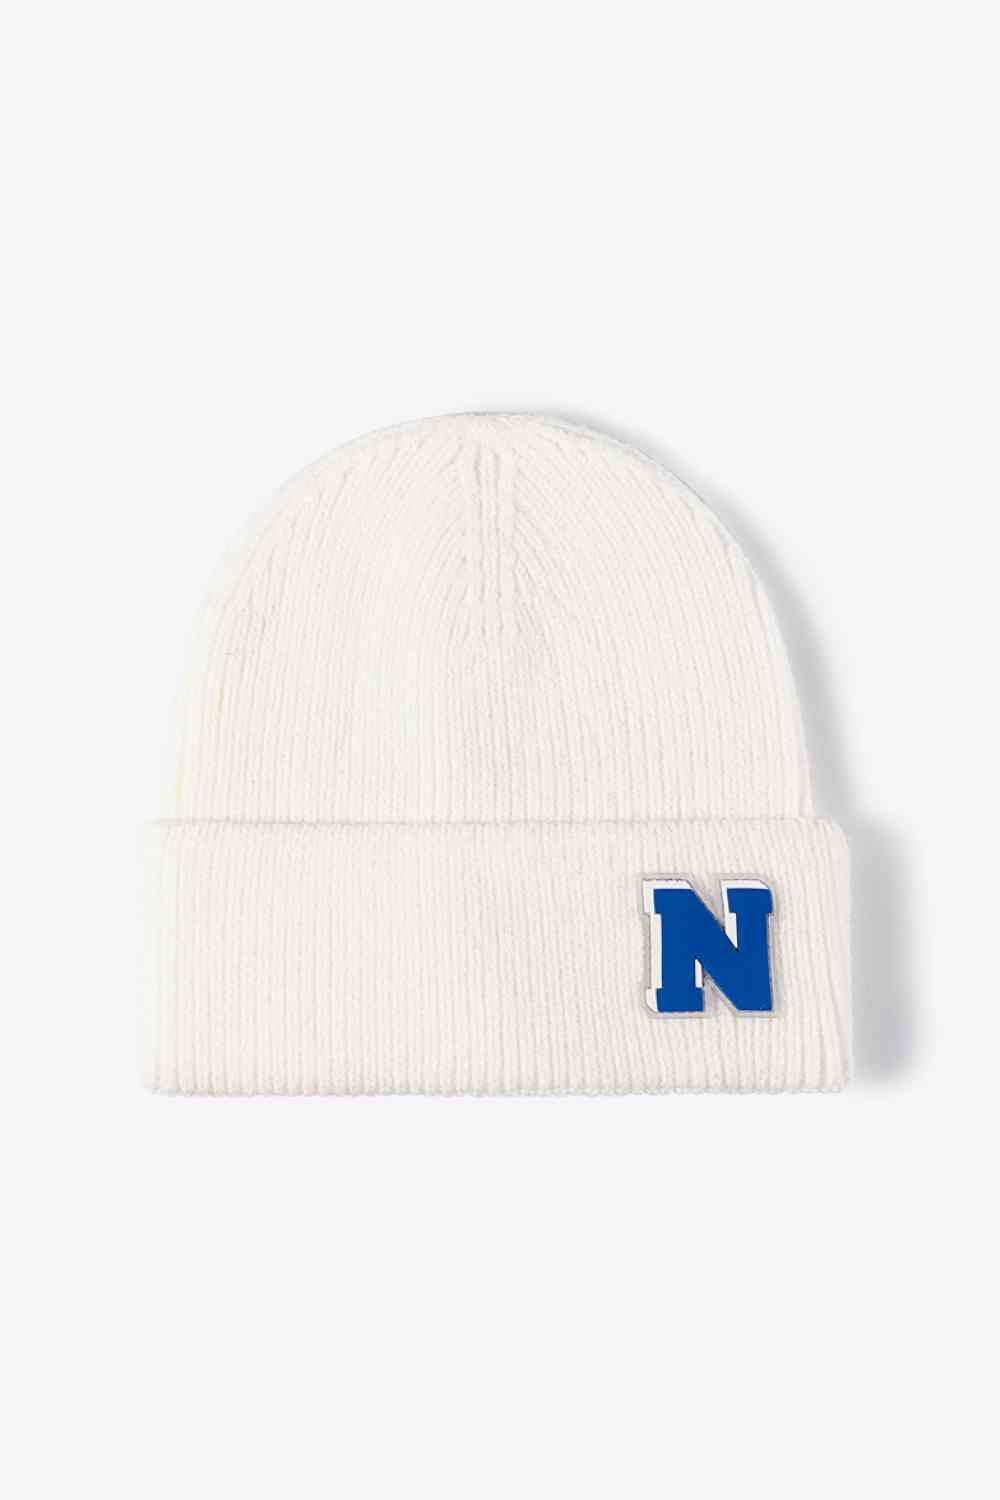 Letter N Patch Cuffed Knit Beanie White One Size